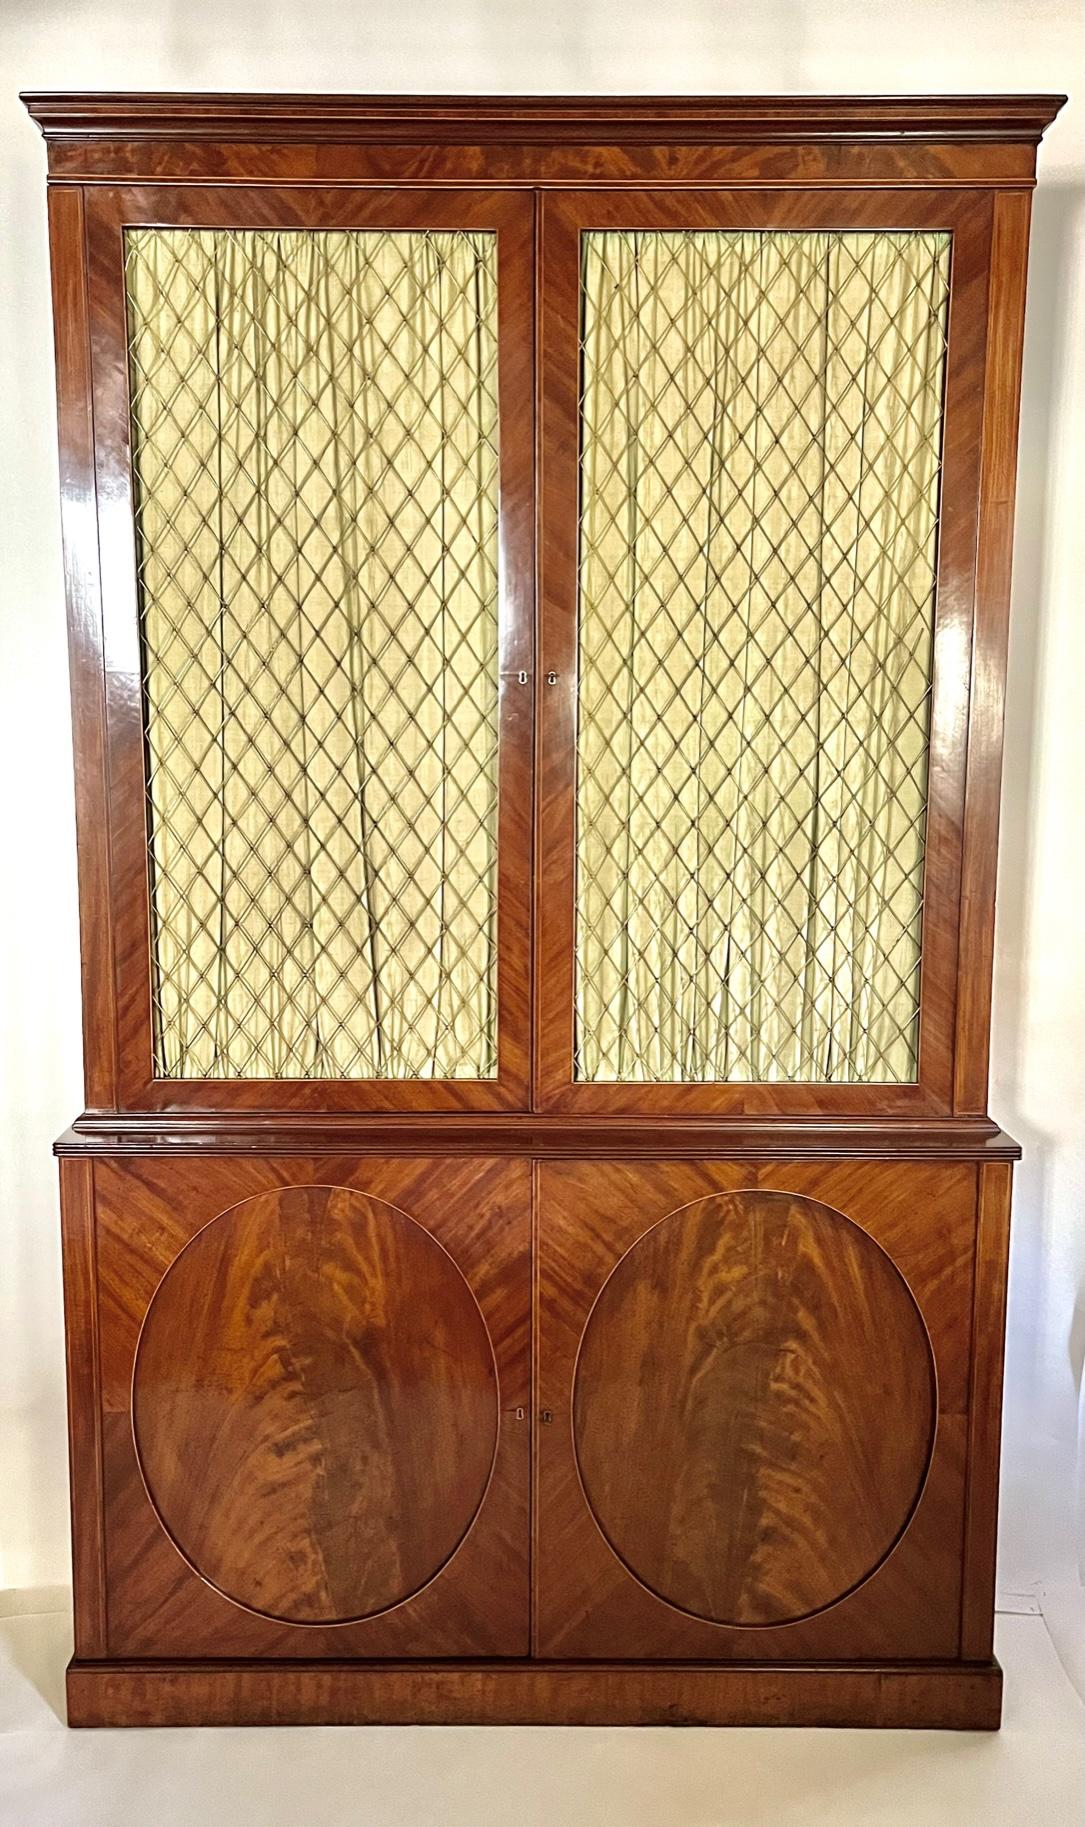 A fine and elegant circa 1810 English Late George III Regency period press cabinet of large scale having exquisitely grained mahogany veneered and satinwood inlaid case, the fixed moulded cornice surmounting double harlequin or lozenge pattern wire